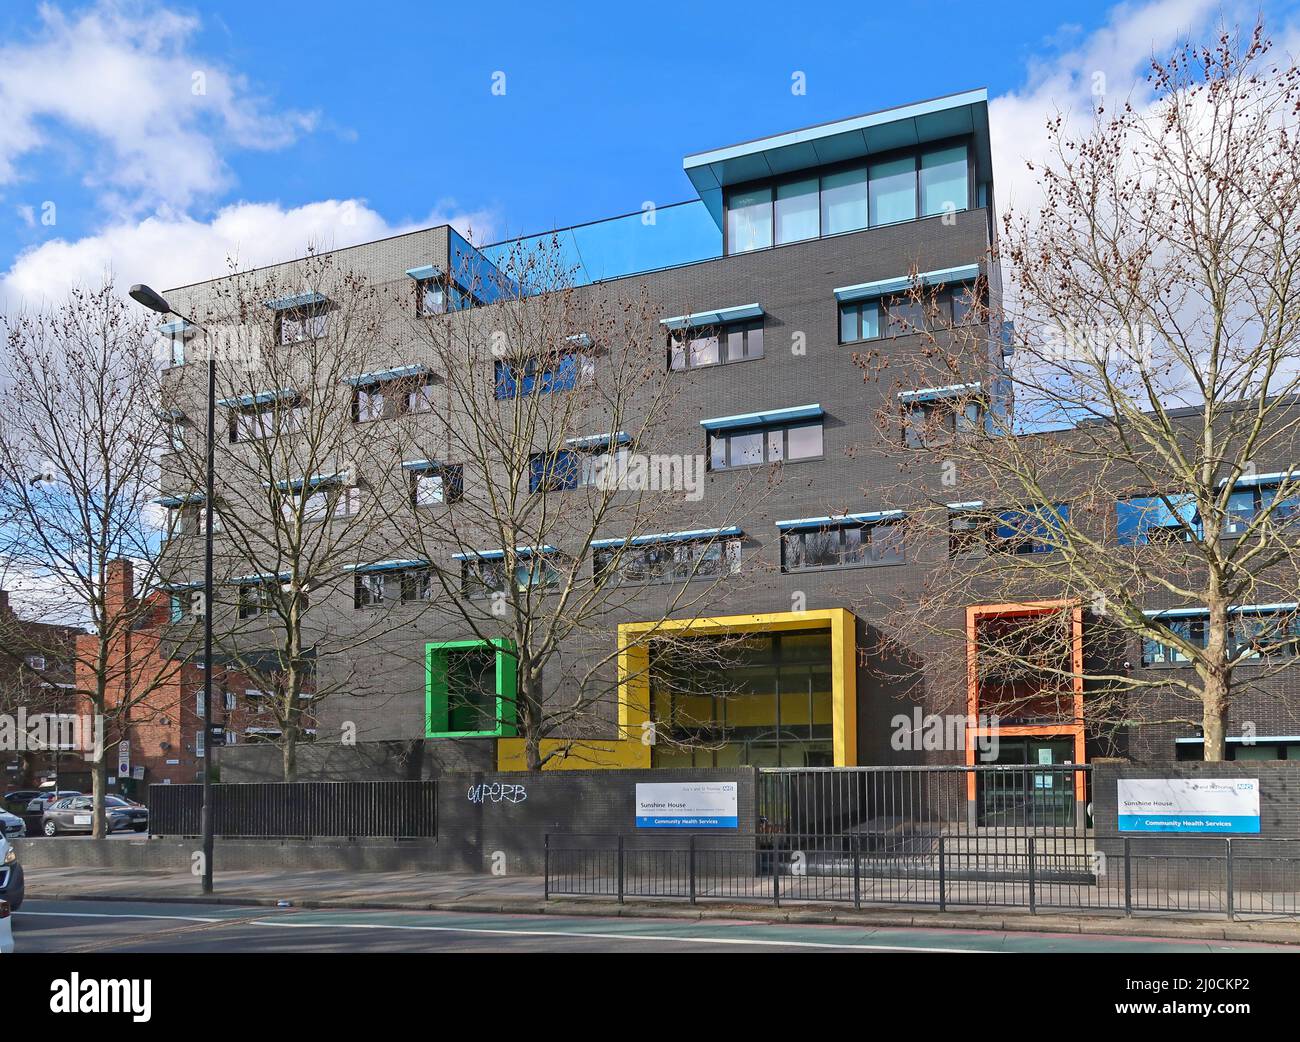 Sunshine House, childrens development centre on Peckham Road, Camberwell, London. Community health facility designed by Allford Hall Monaghan Morris. Stock Photo